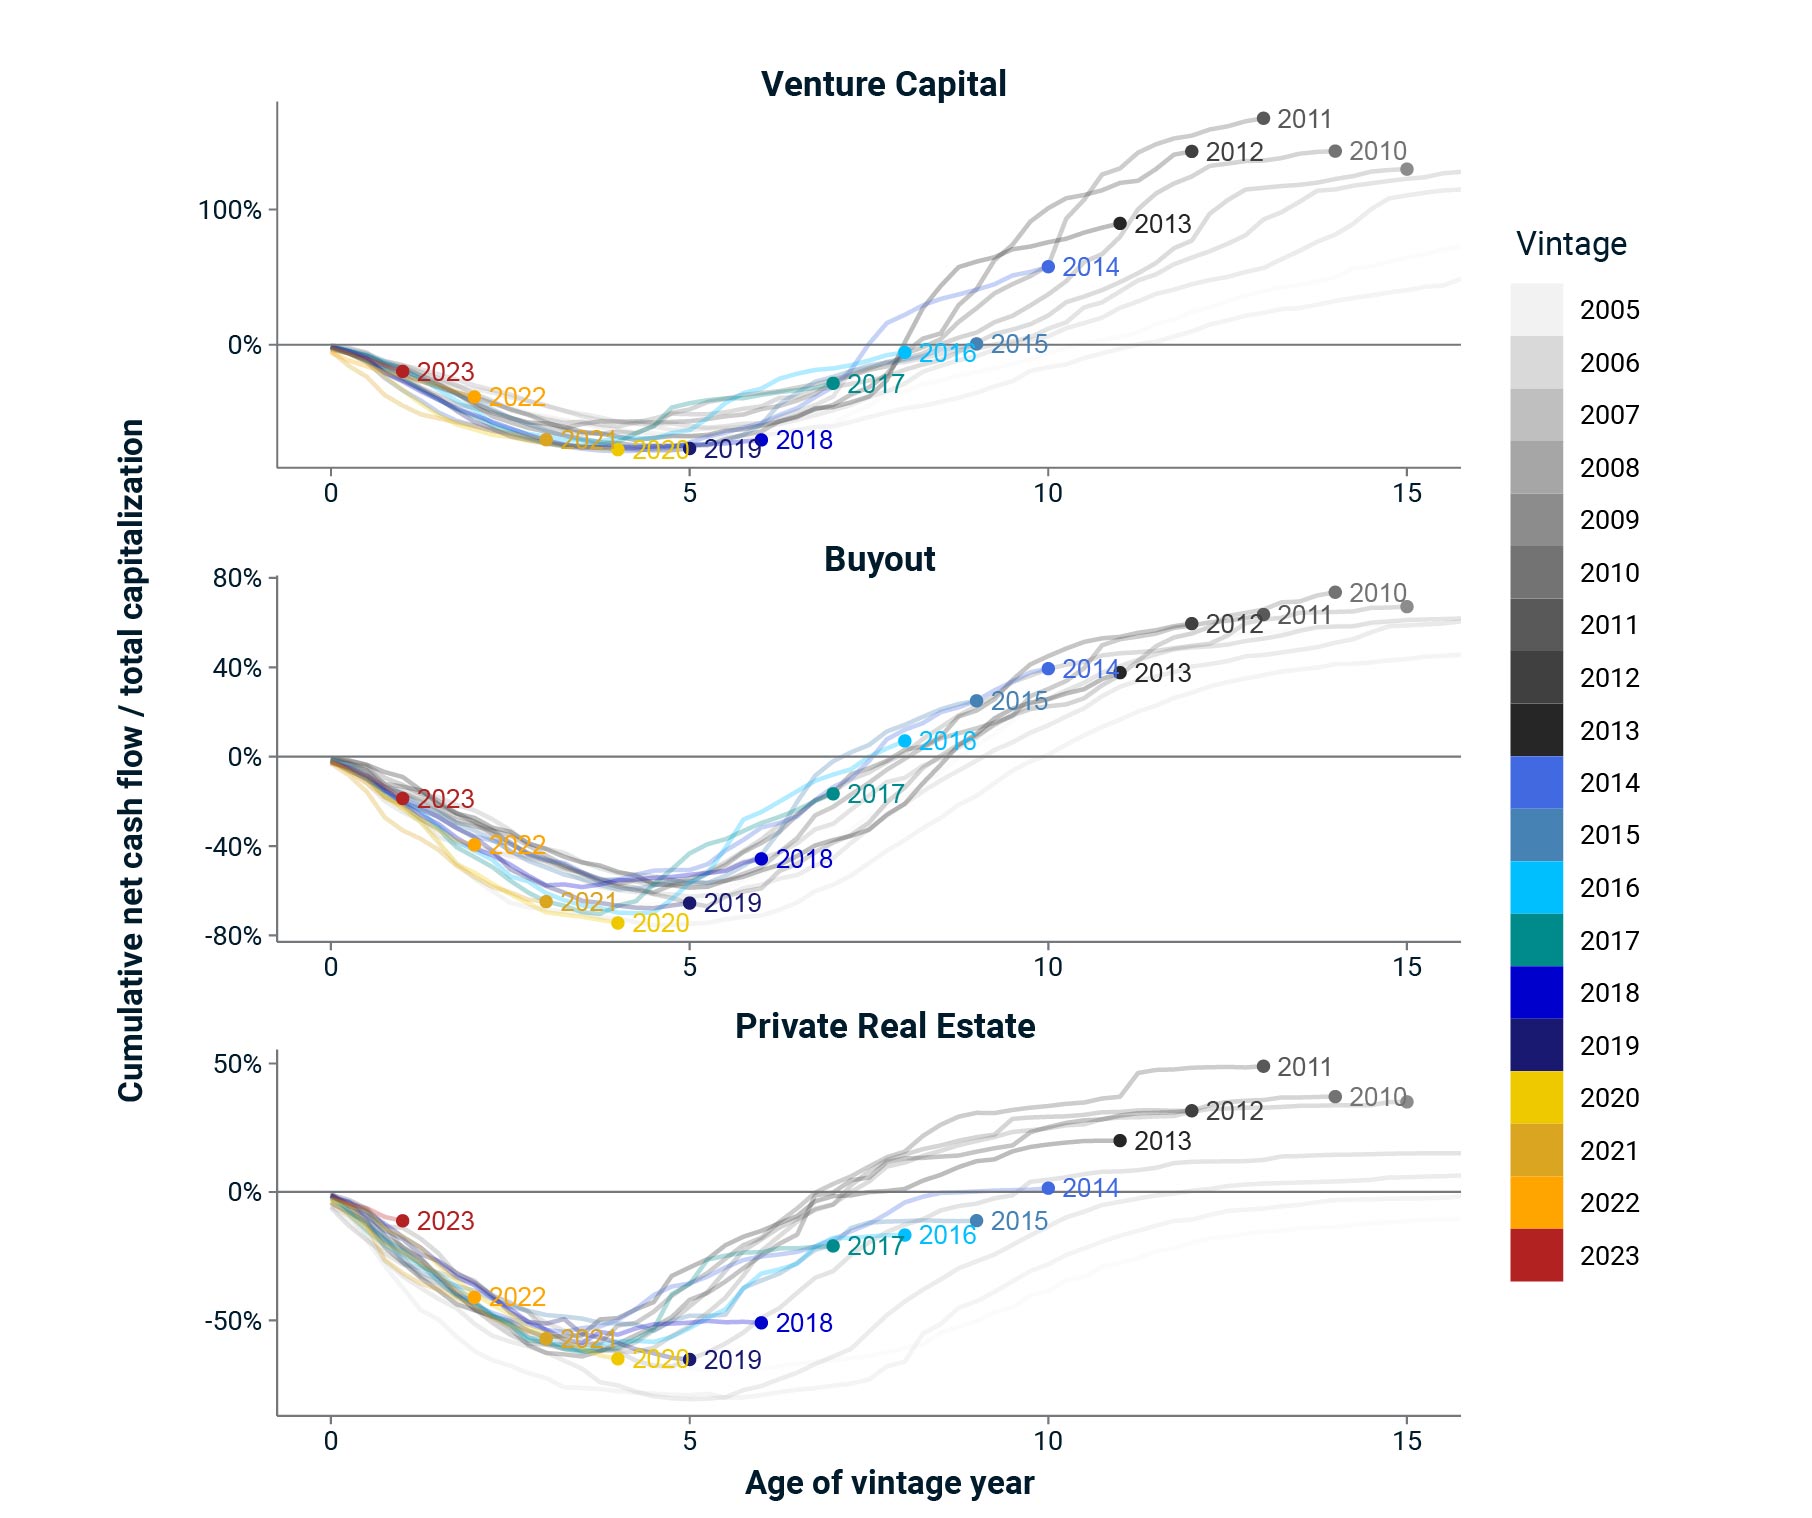 The trio of charts displays the cumulative net cash flow as a percentage of total capitalization over the age of vintage years for three different types of investments: venture capital, buyout, and real estate. Each line represents a different vintage year, with the color gradient from light gray to dark blue indicating the progression from older to more recent vintages, spanning from 2005 to 2023. The x-axis shows the age of the vintage year, while the y-axis shows the cumulative net cash flow as a percentage of the total capitalization. The data points for each vintage year are marked on the lines.